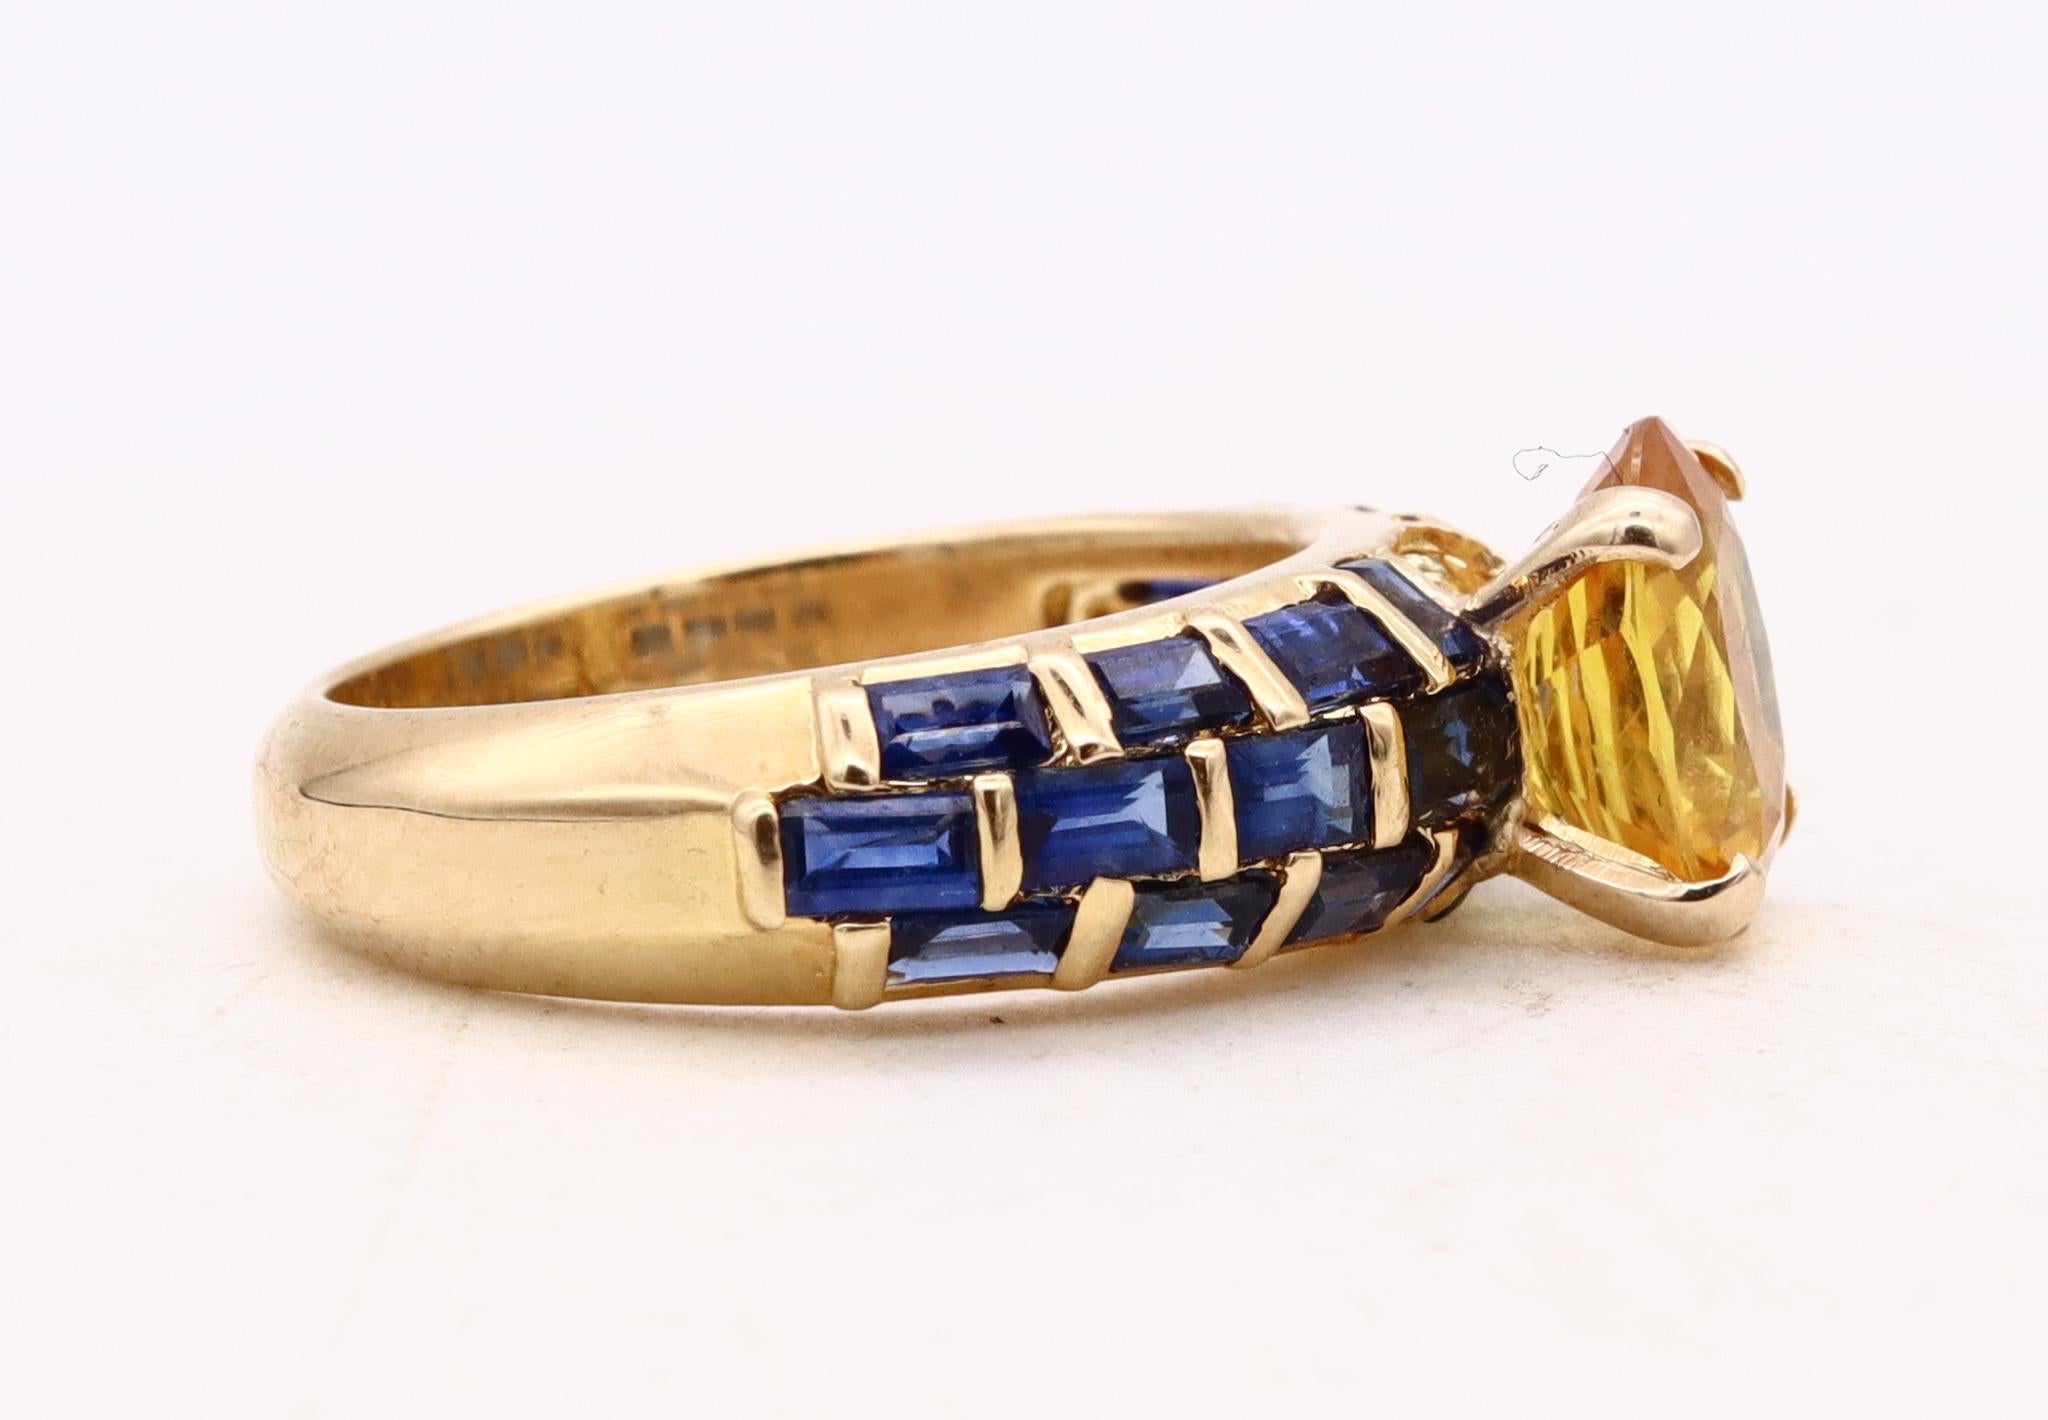 Mixed Cut Sabbadini Milano Jeweled Ring 18kt Gold with 4.49 Cts Blue and Yellow Sapphires